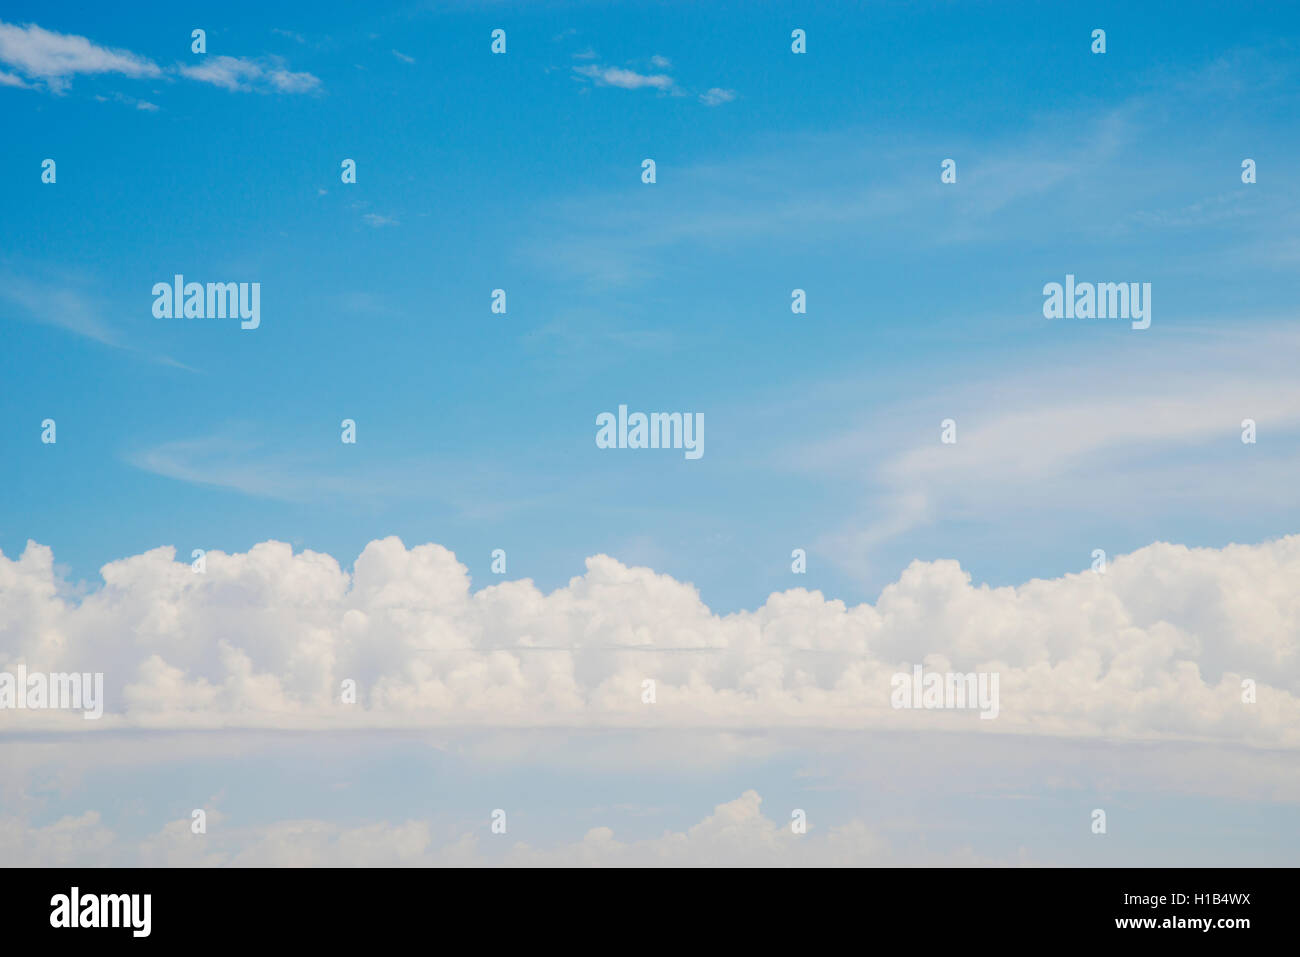 Blue sky with white clouds. Stock Photo